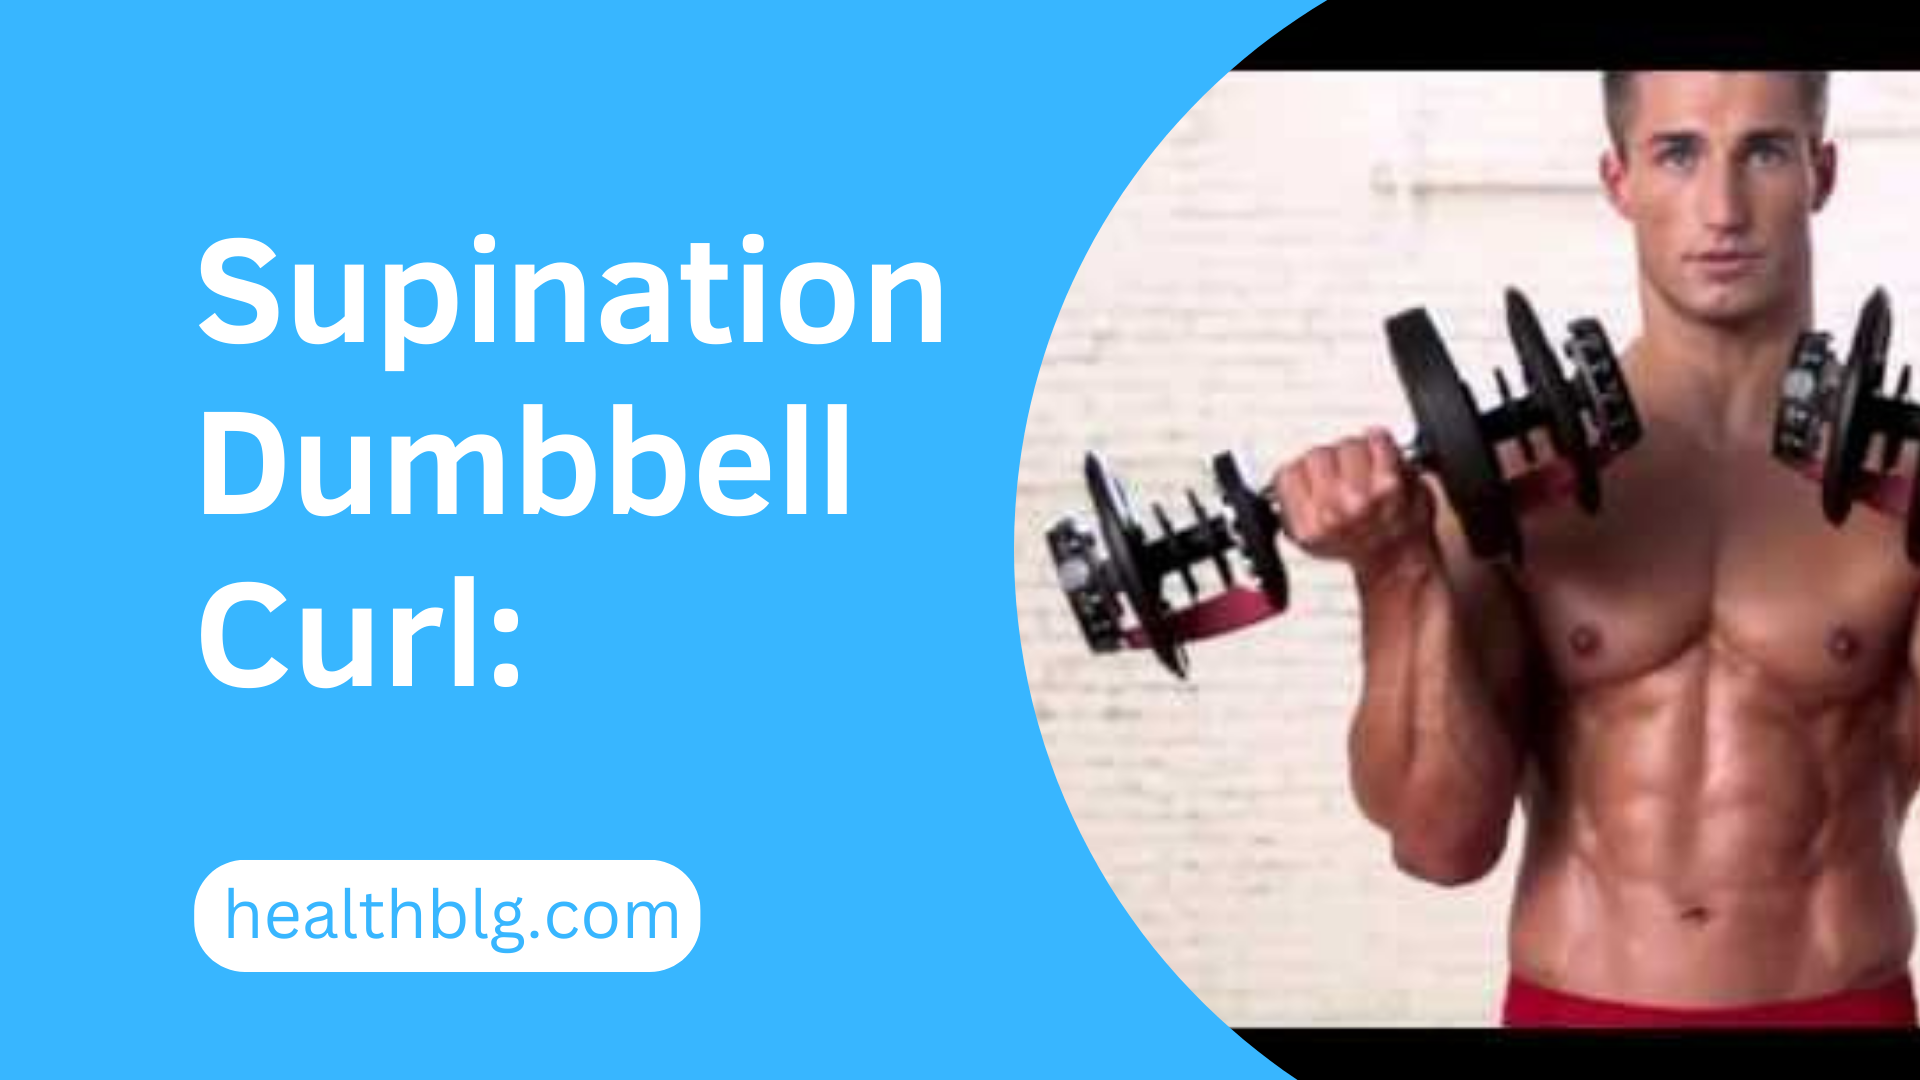 Supination dumbbell curl